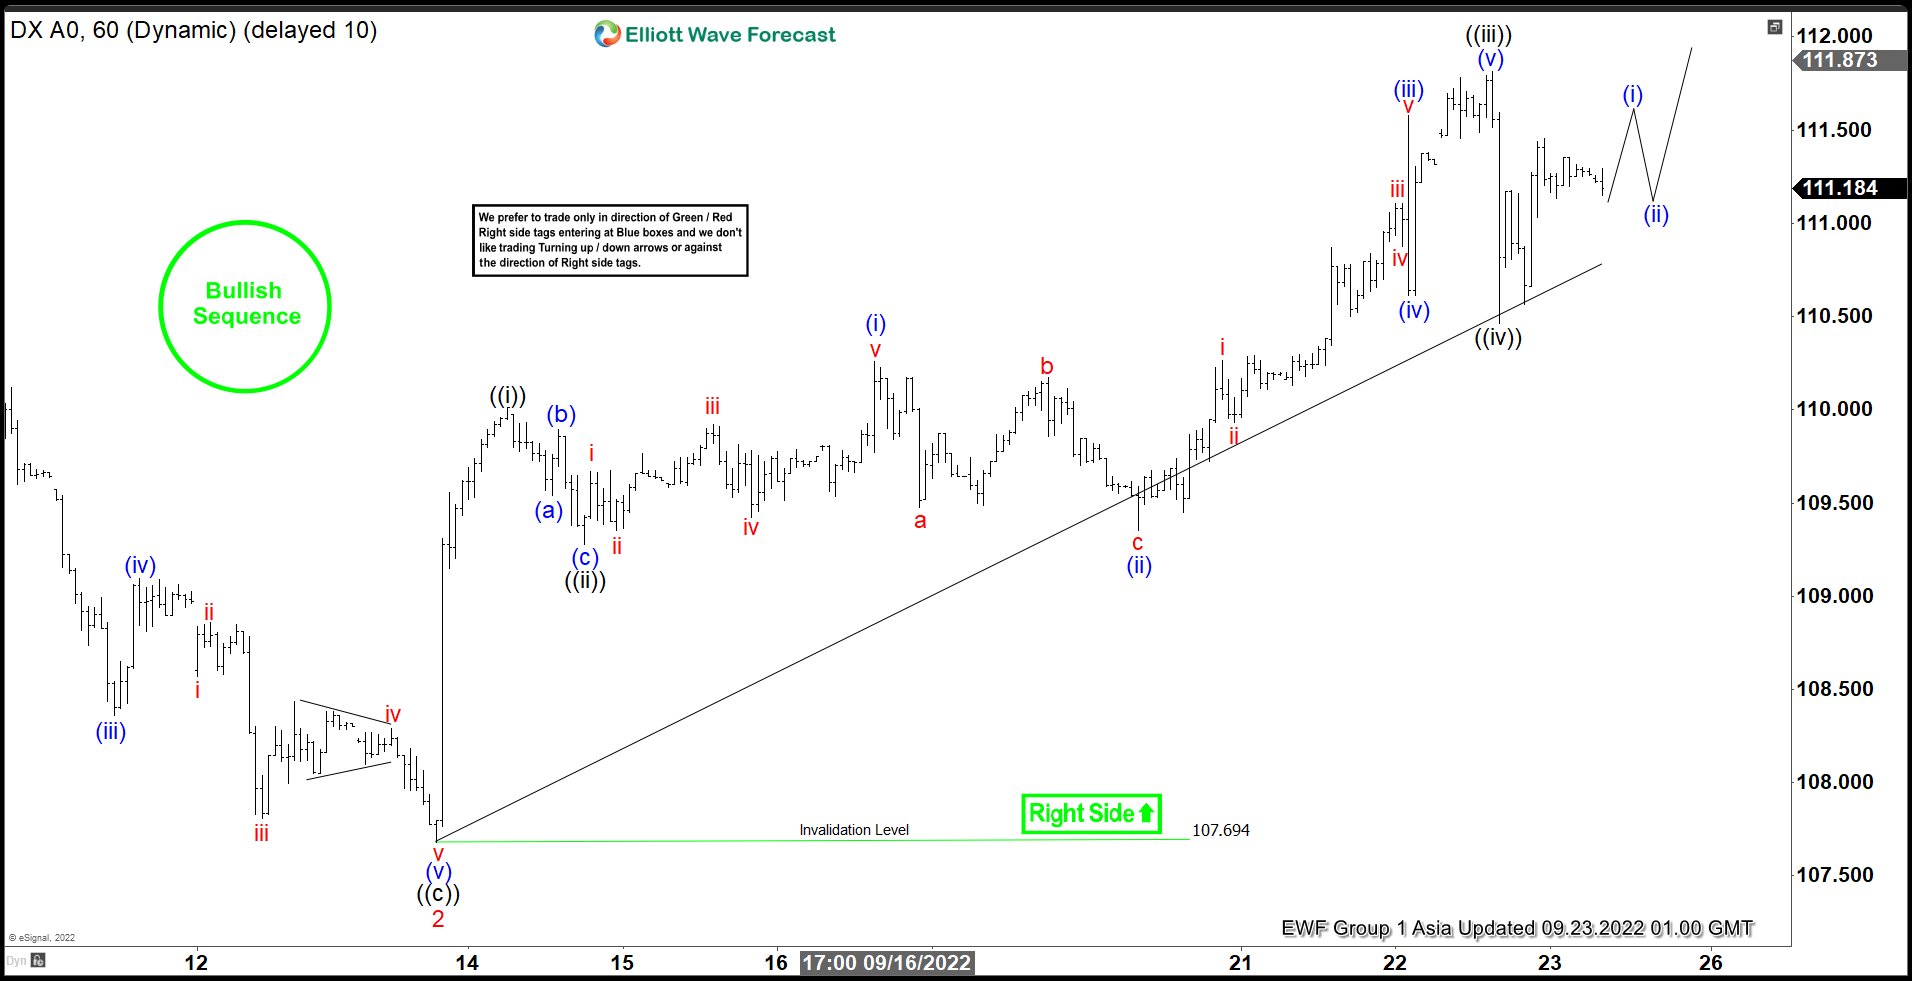 Elliott Wave View: Dollar Index (DXY) Bullish Cycle Looks Incomplete